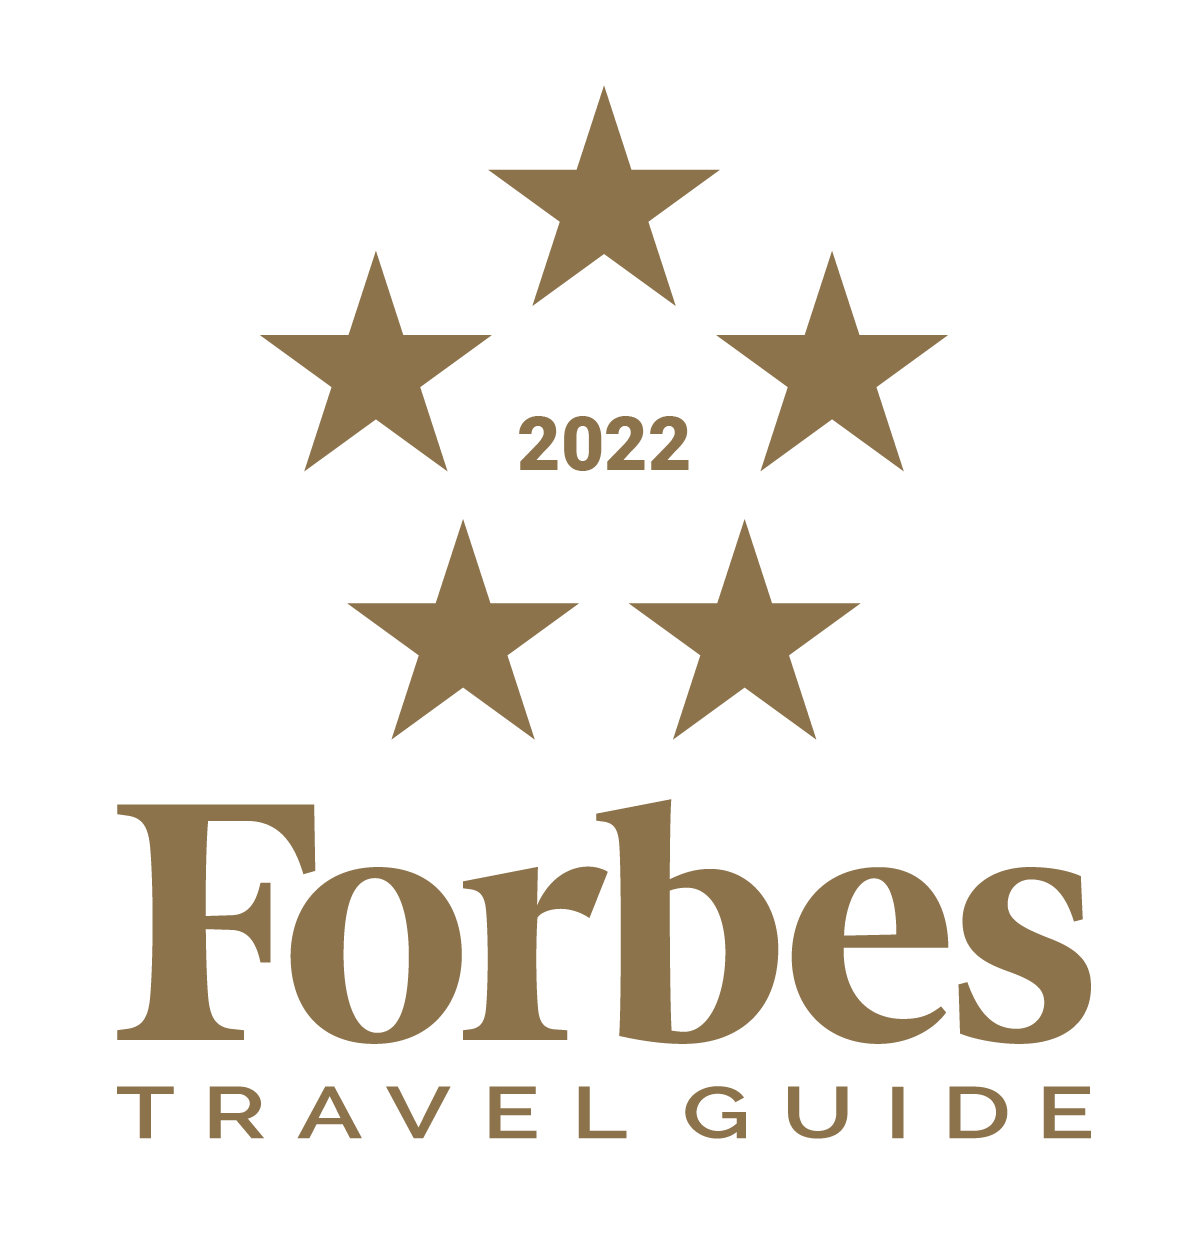 Forbes Travel Guide 2022 logo